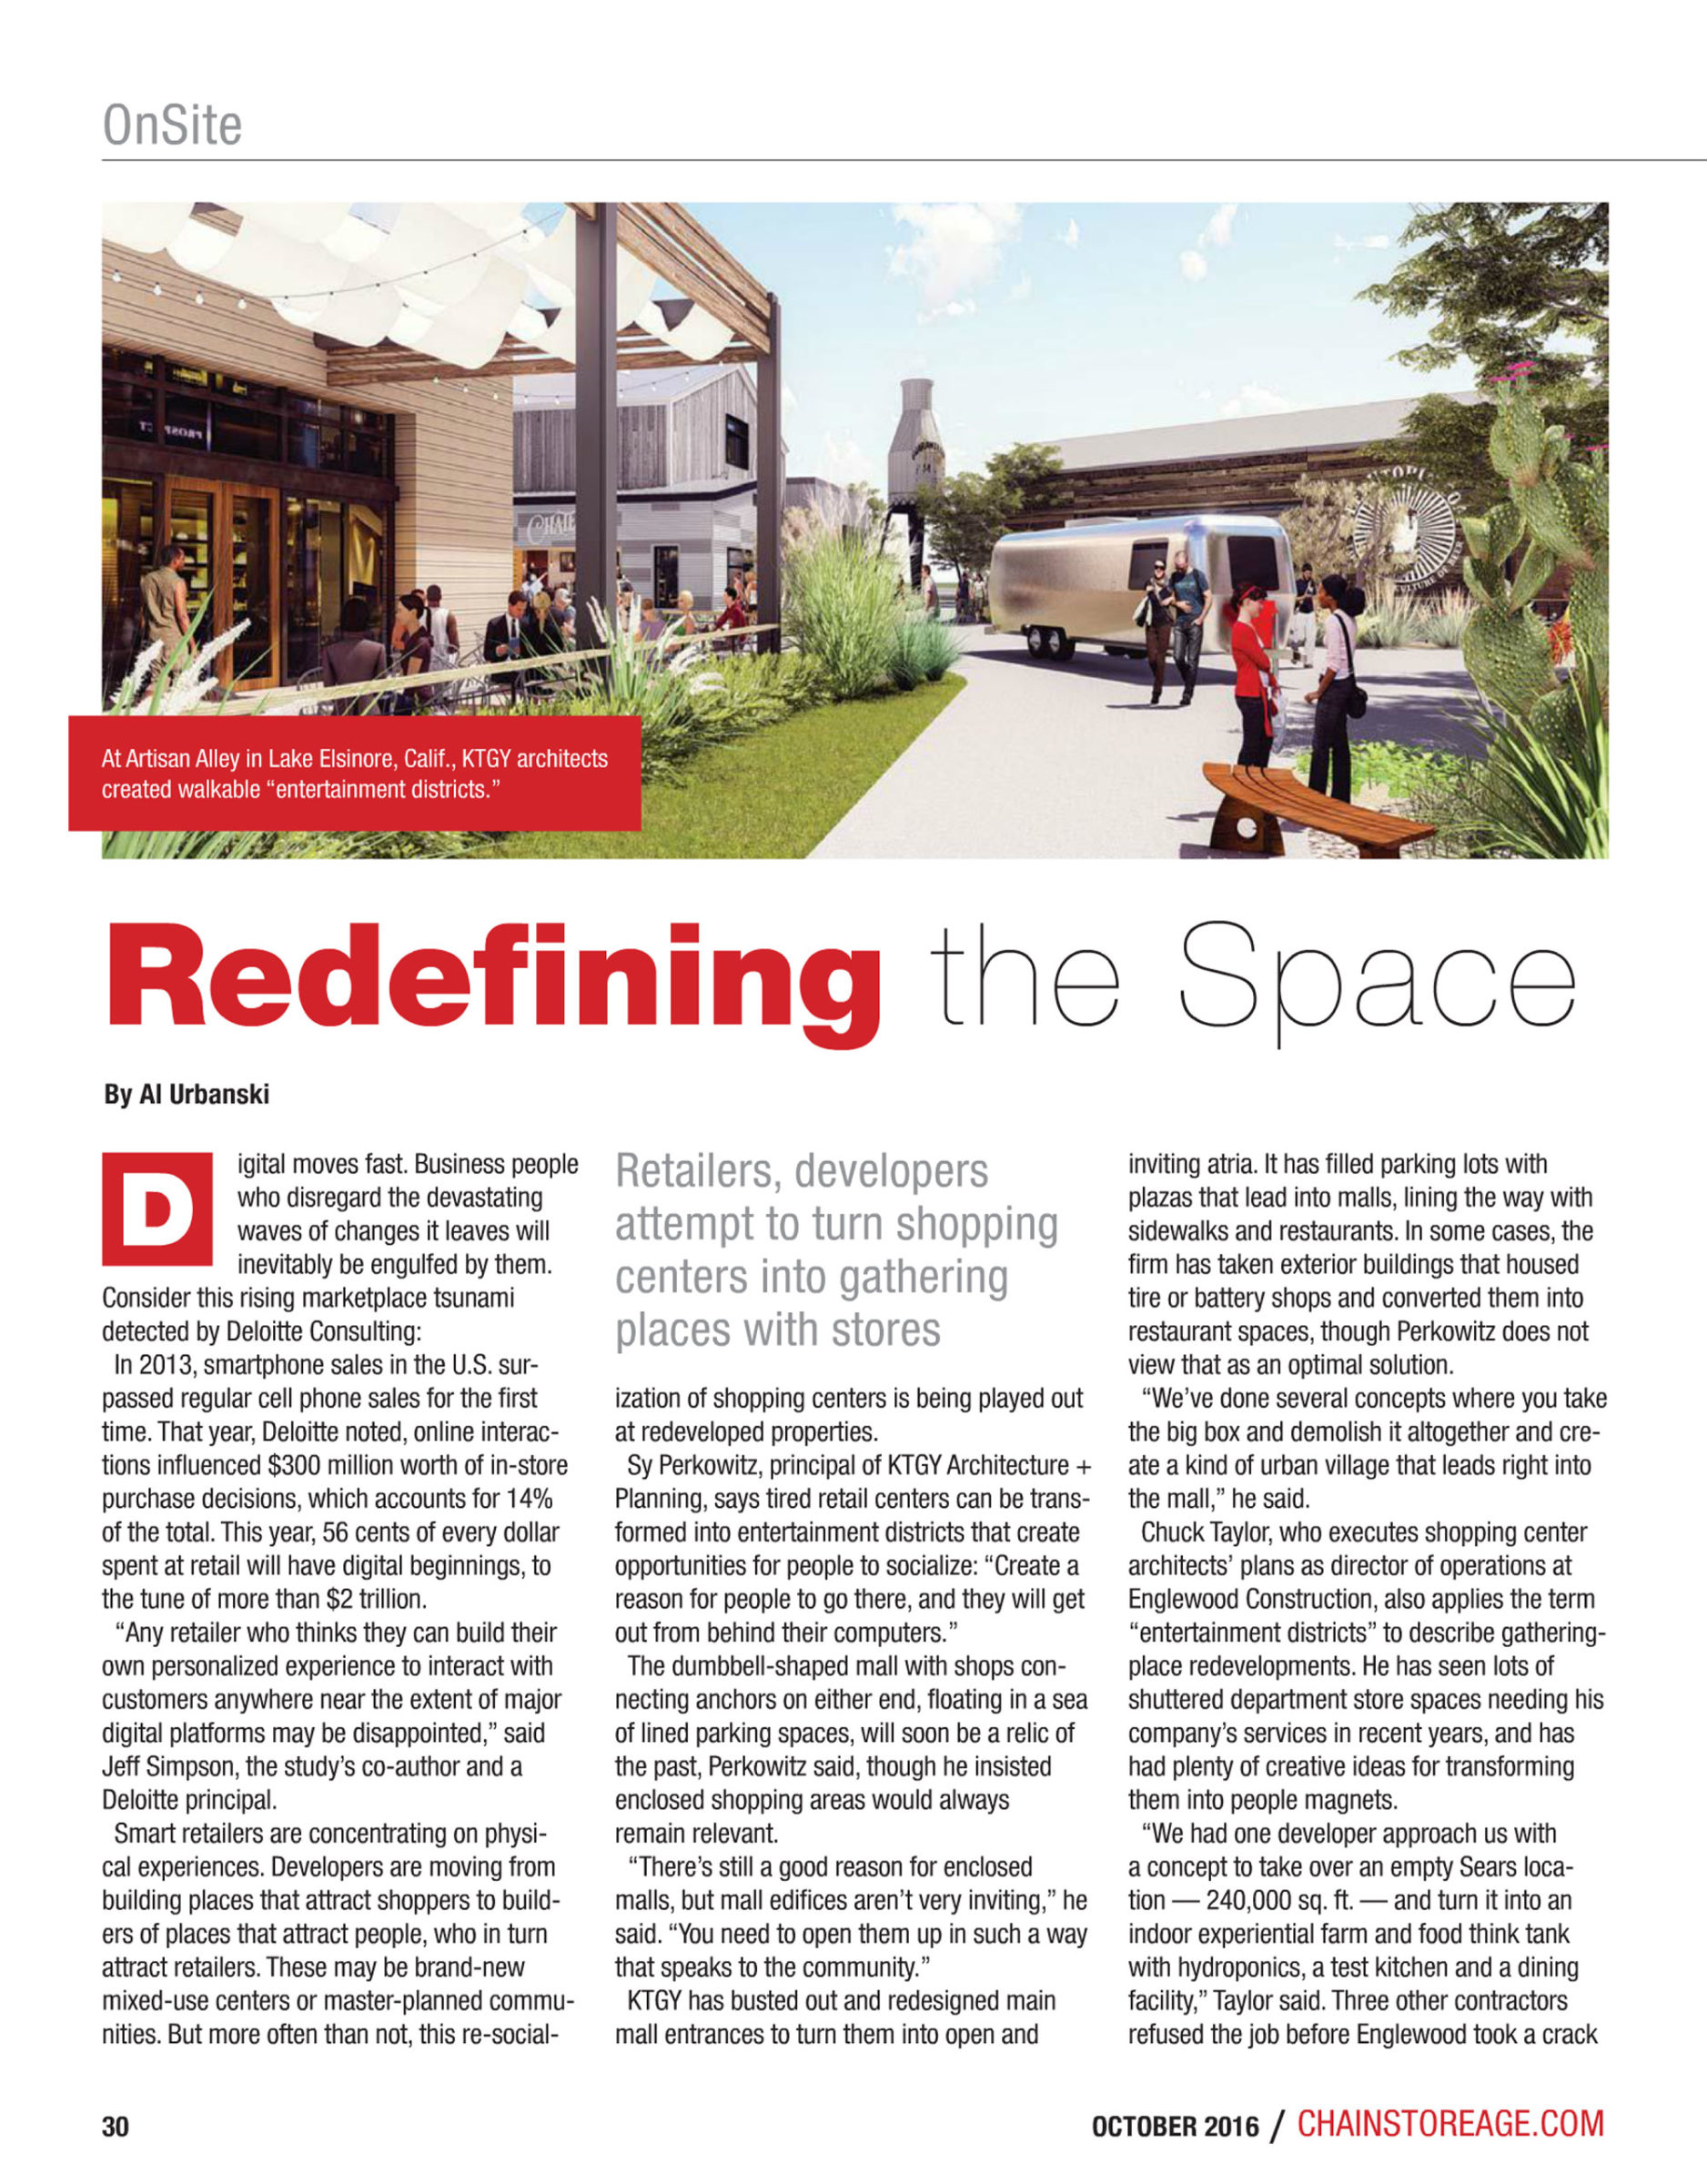 Redefining-The-Space---Chain-Store-Age-1